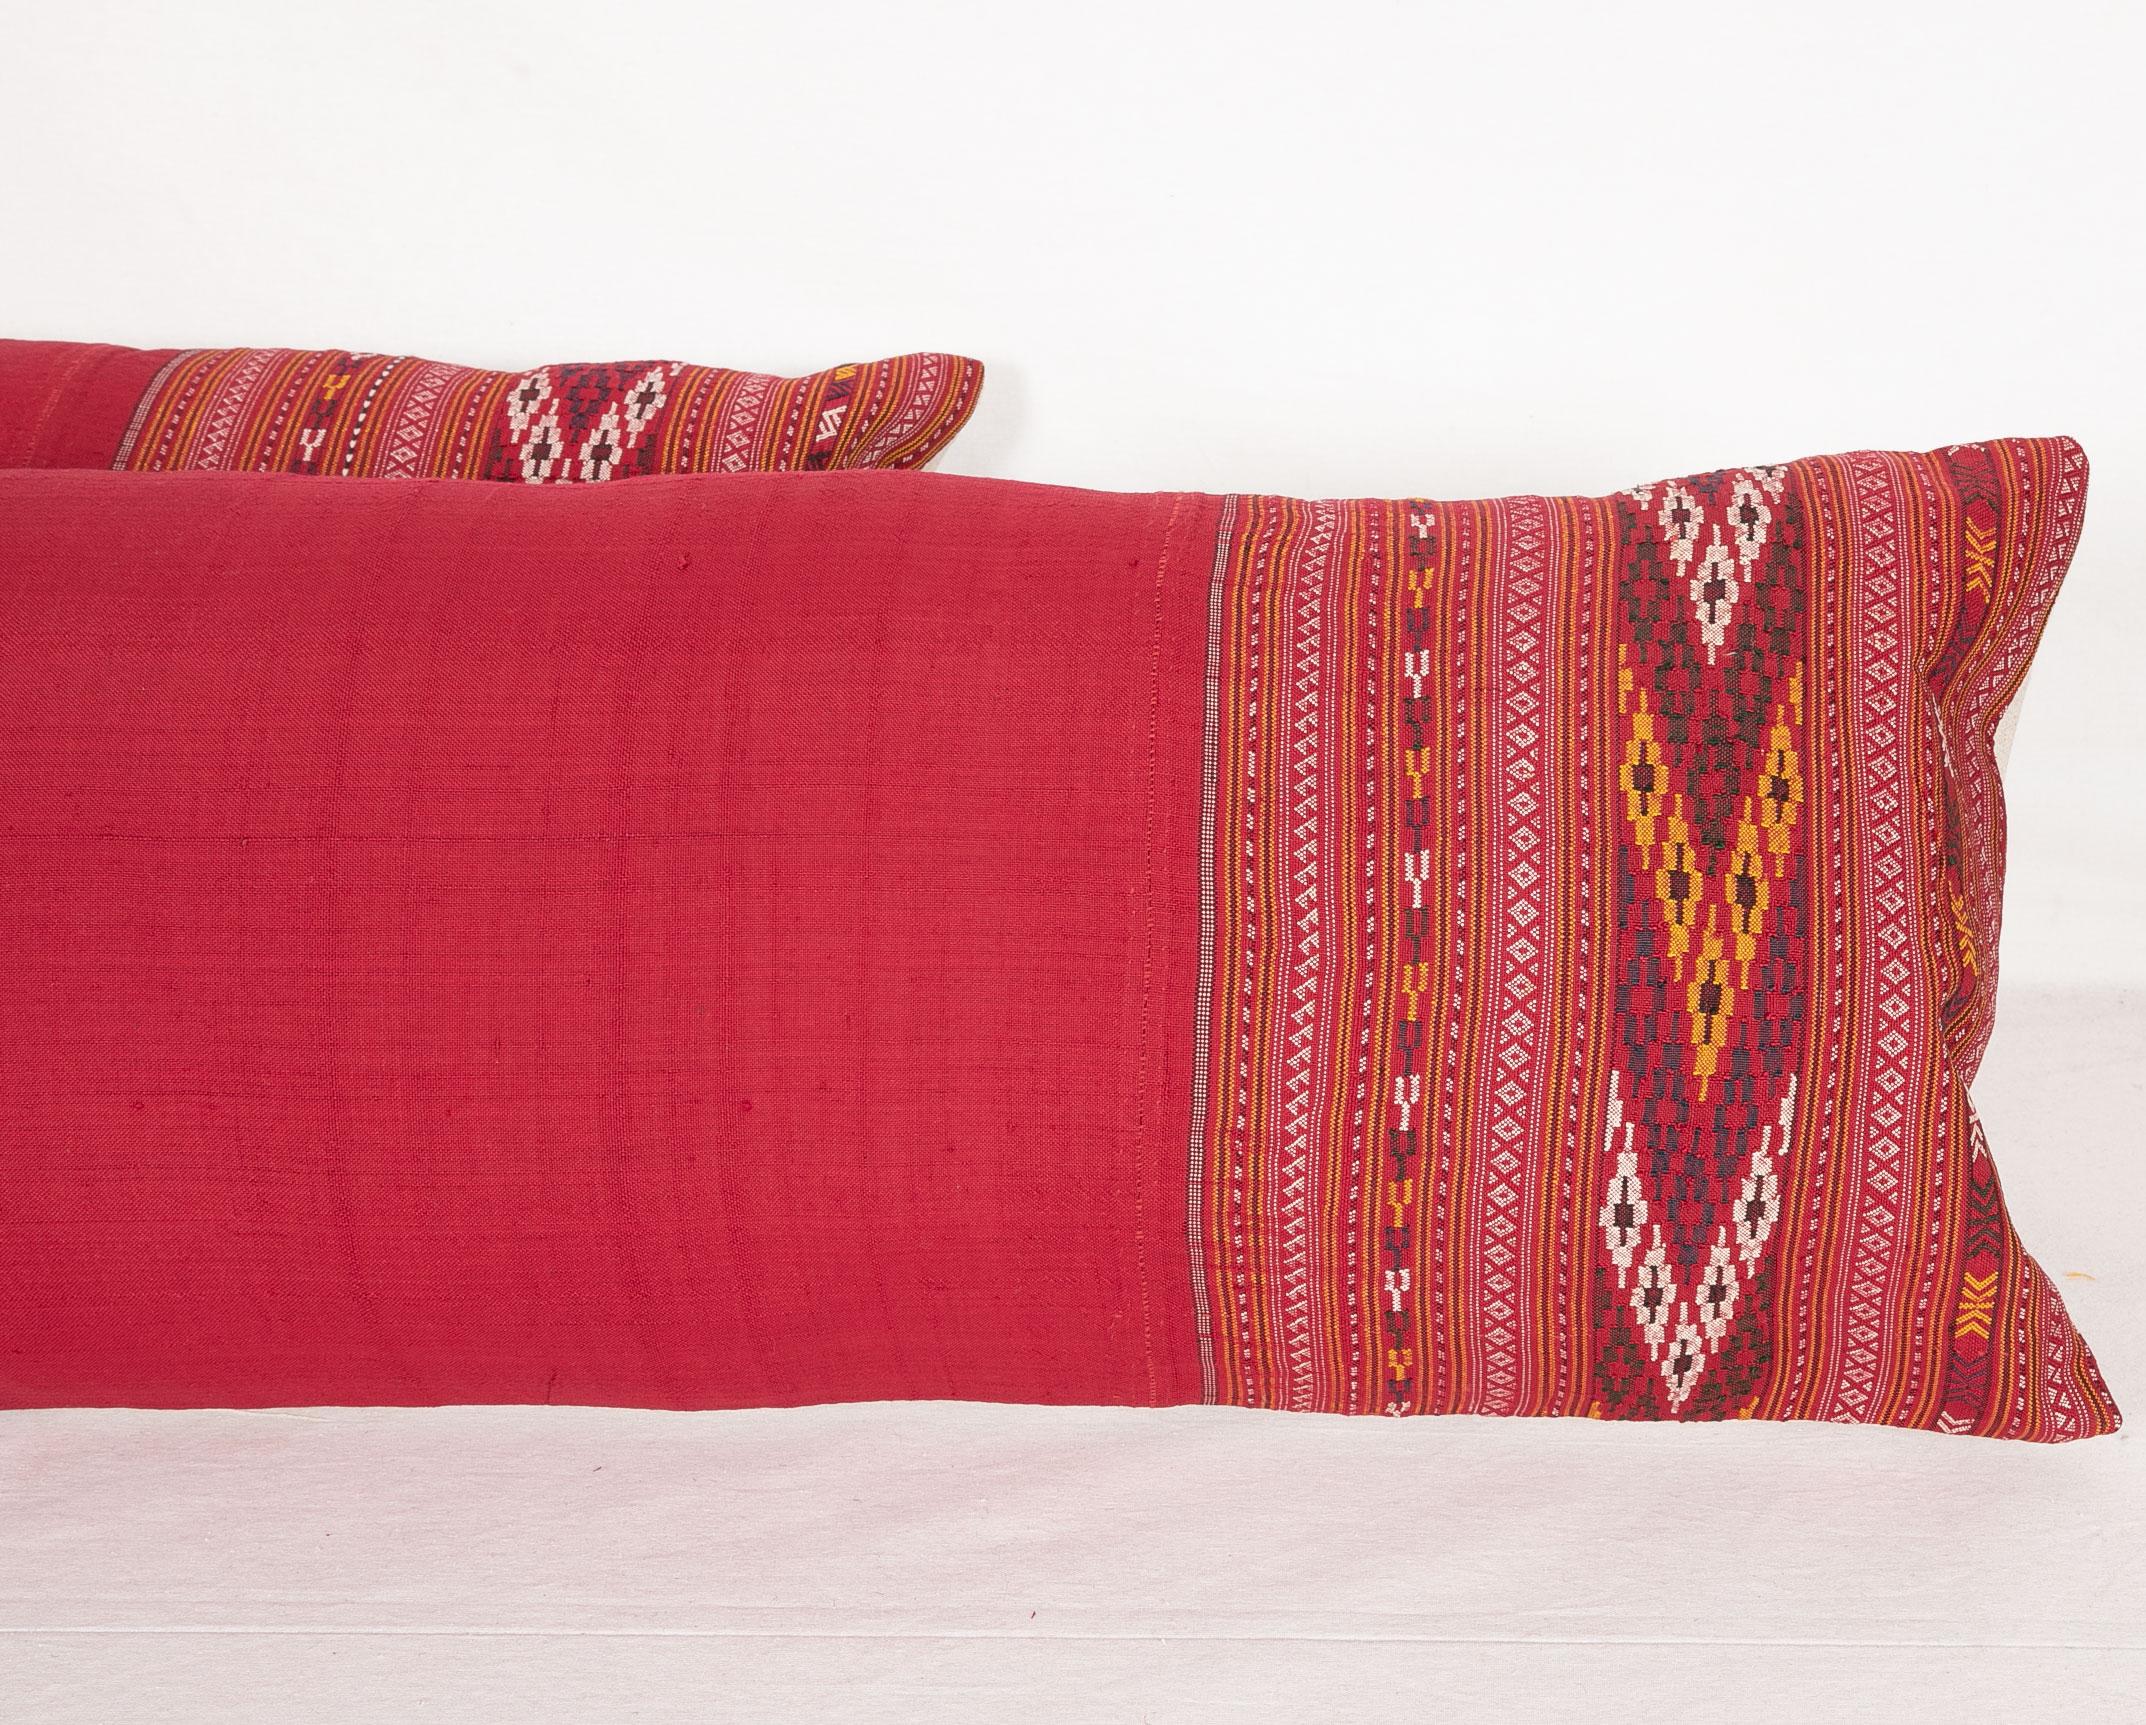 Tribal Lumbar Pillow Cases Fashioned from an Early 20th Century Turkmen Shawl